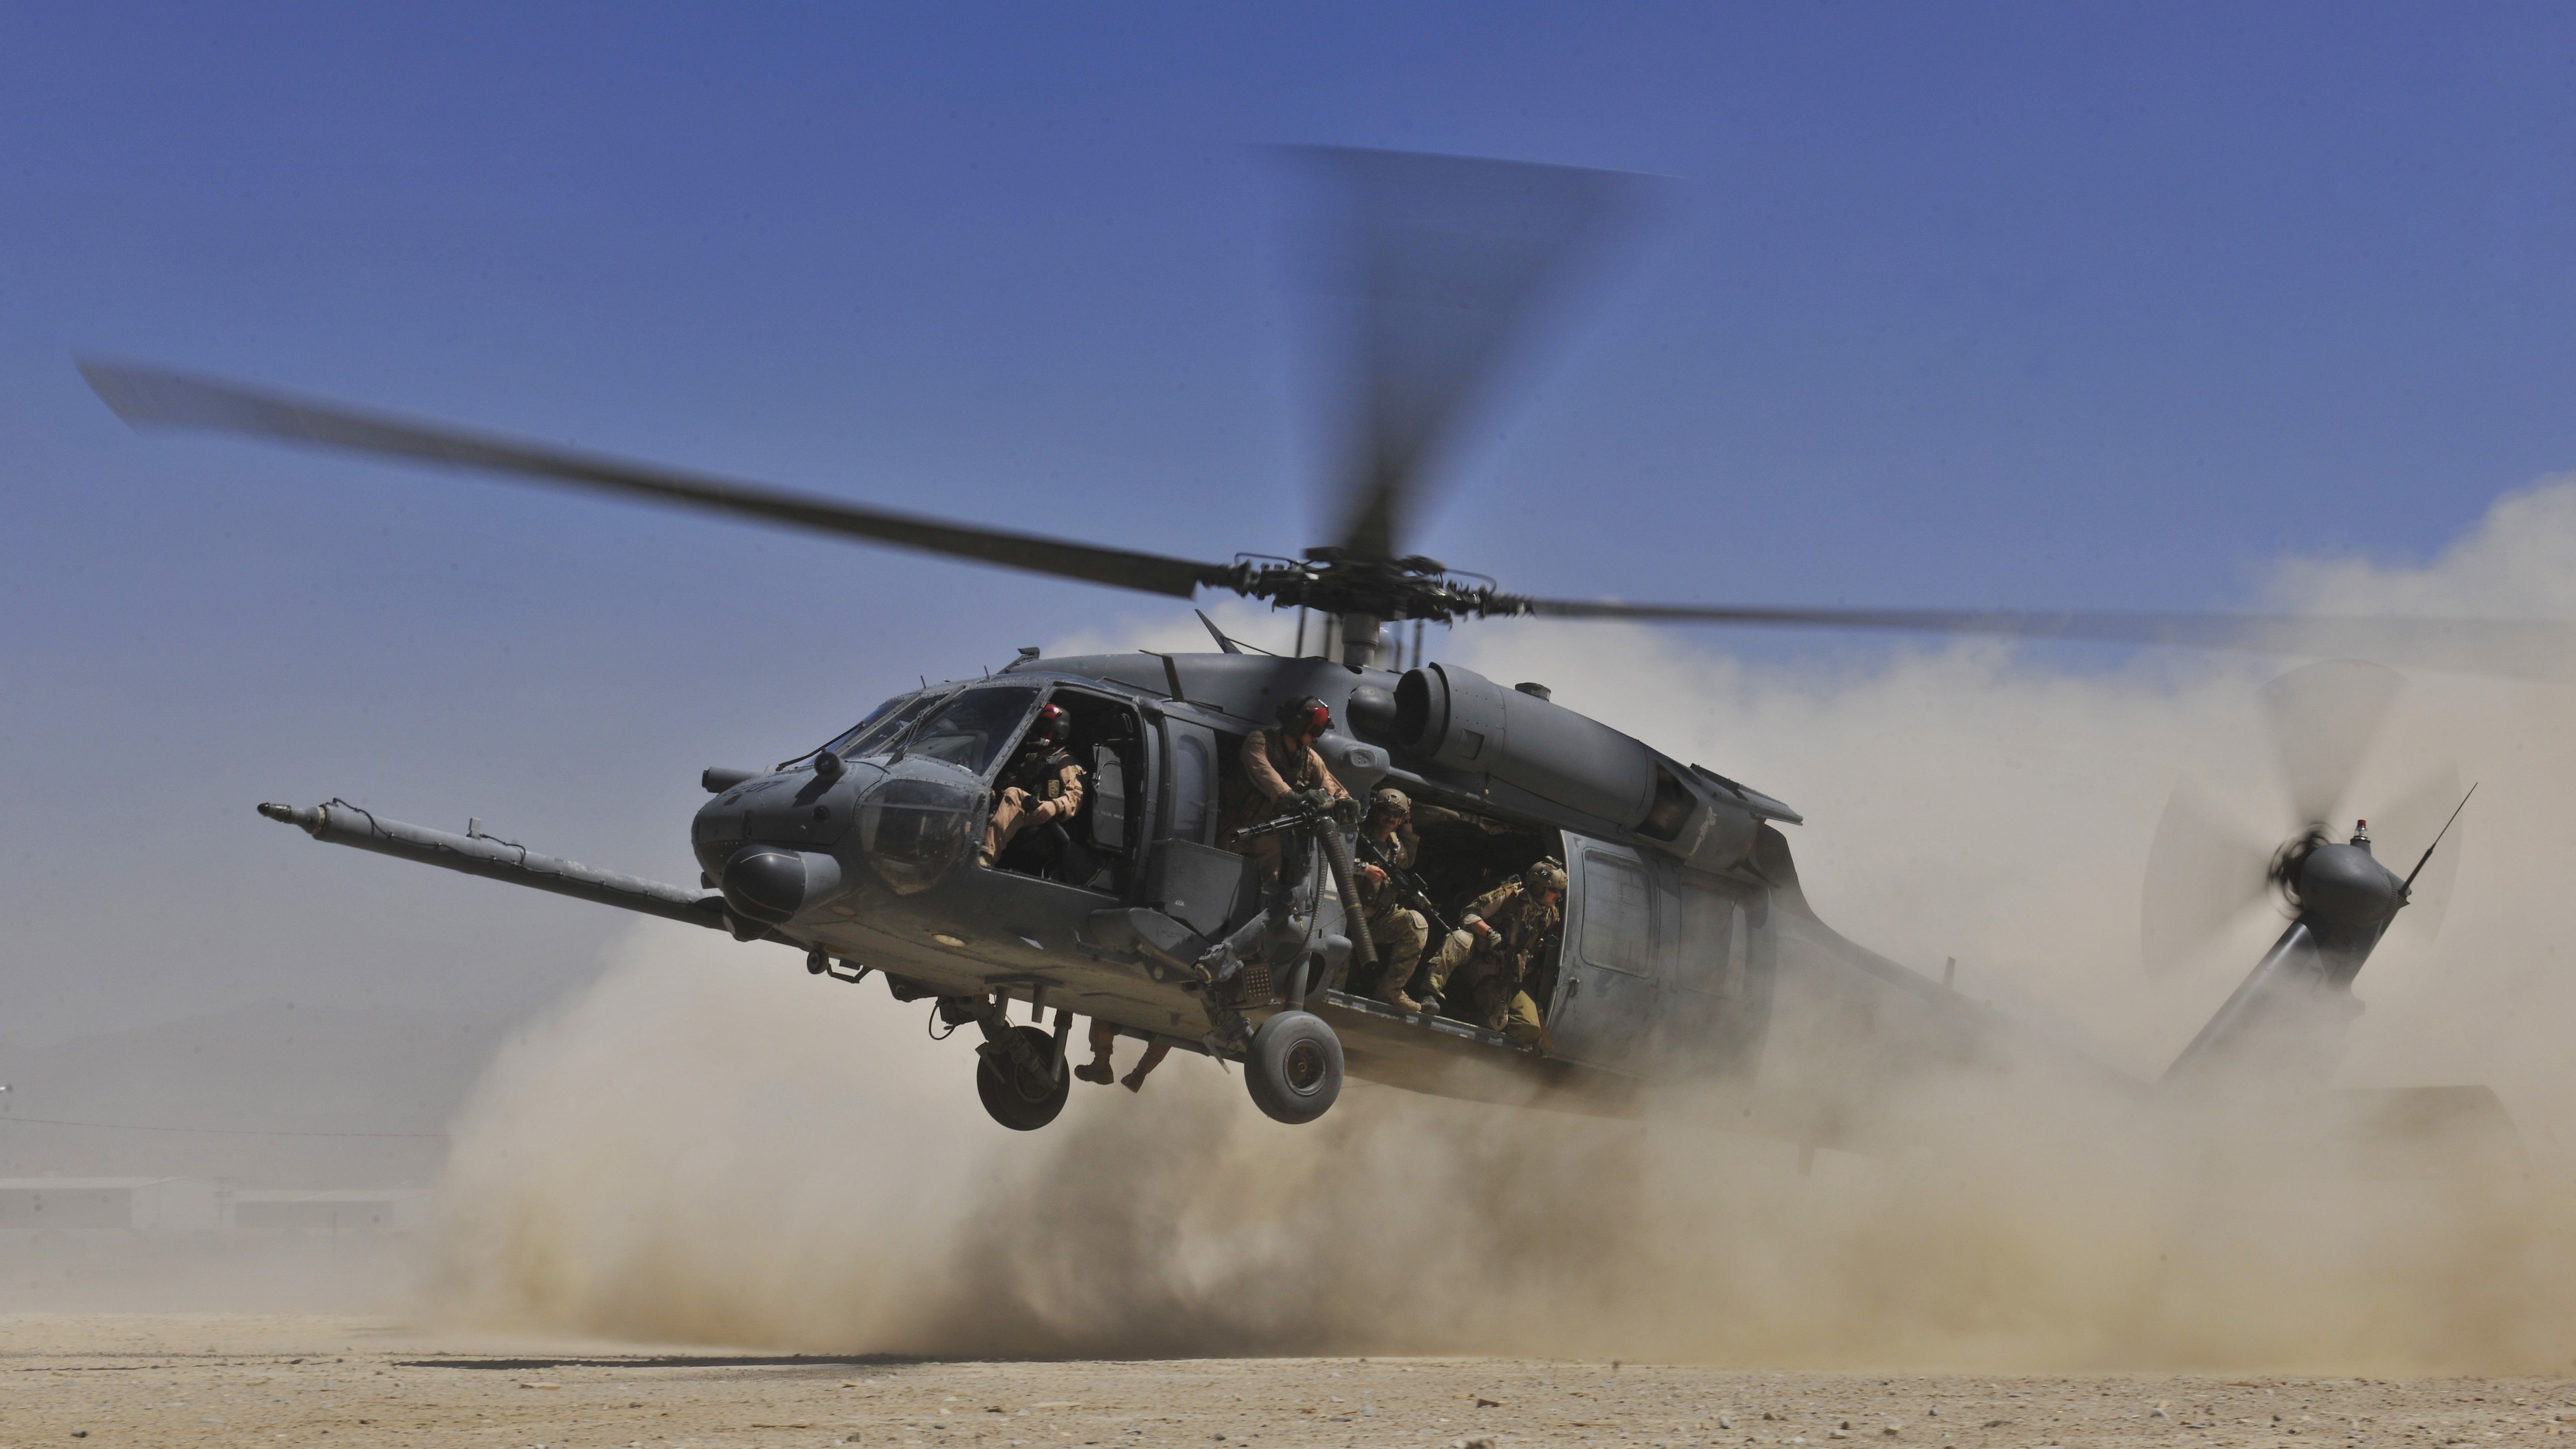 Wallpaper Sikorsky UH 60 Black Hawk, Helicopter, U.S. Air Force, , Military